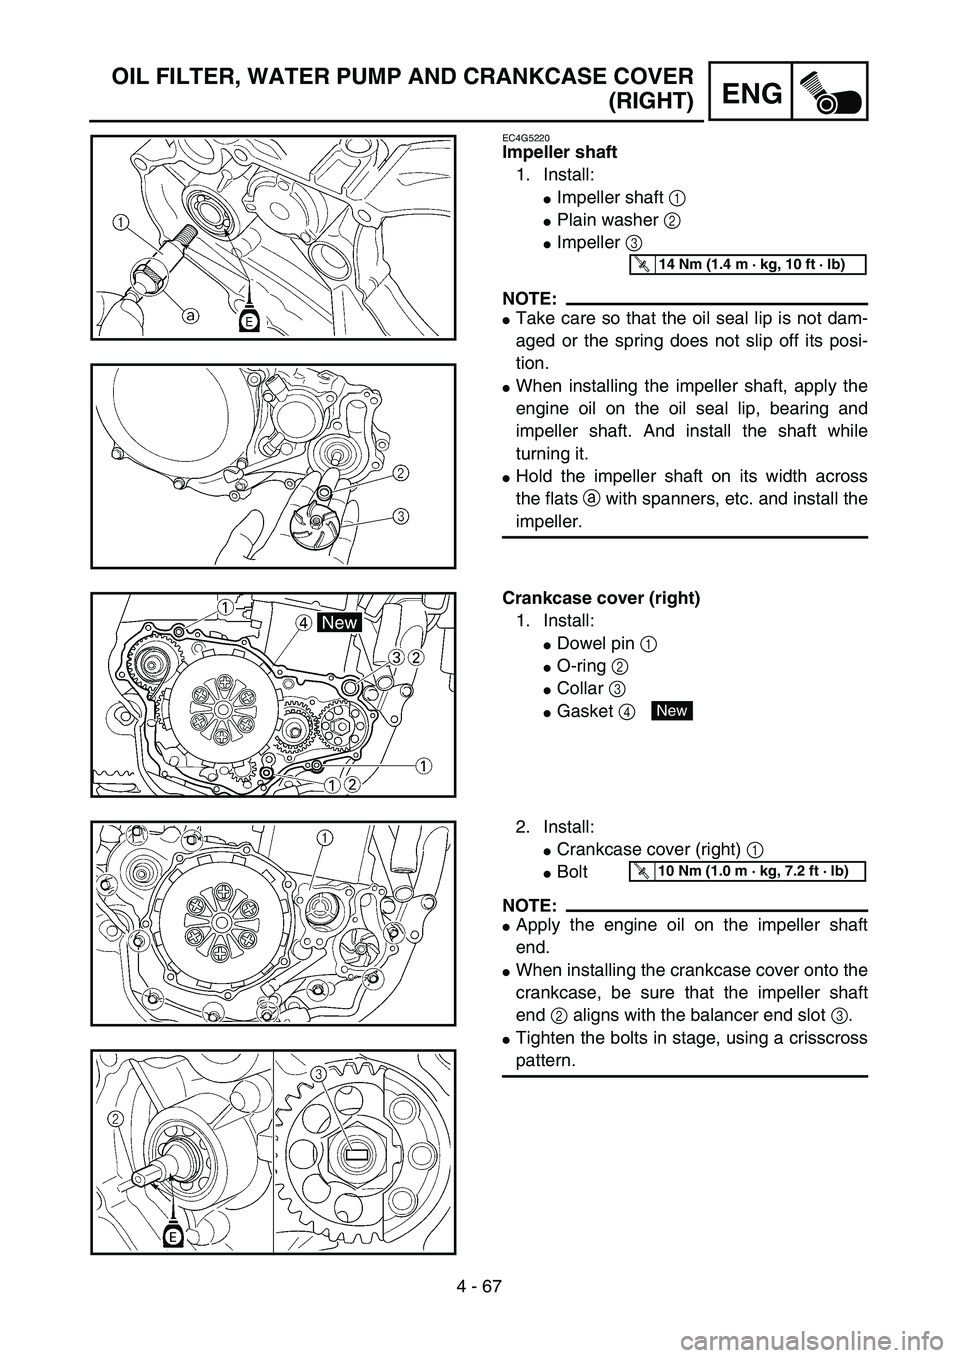 YAMAHA WR 426F 2002  Manuale de Empleo (in Spanish) 4 - 67
ENG
OIL FILTER, WATER PUMP AND CRANKCASE COVER
(RIGHT)
EC4G5220
Impeller shaft
1. Install:
Impeller shaft 1 
Plain washer 2 
Impeller 3 
NOTE:
Take care so that the oil seal lip is not dam-